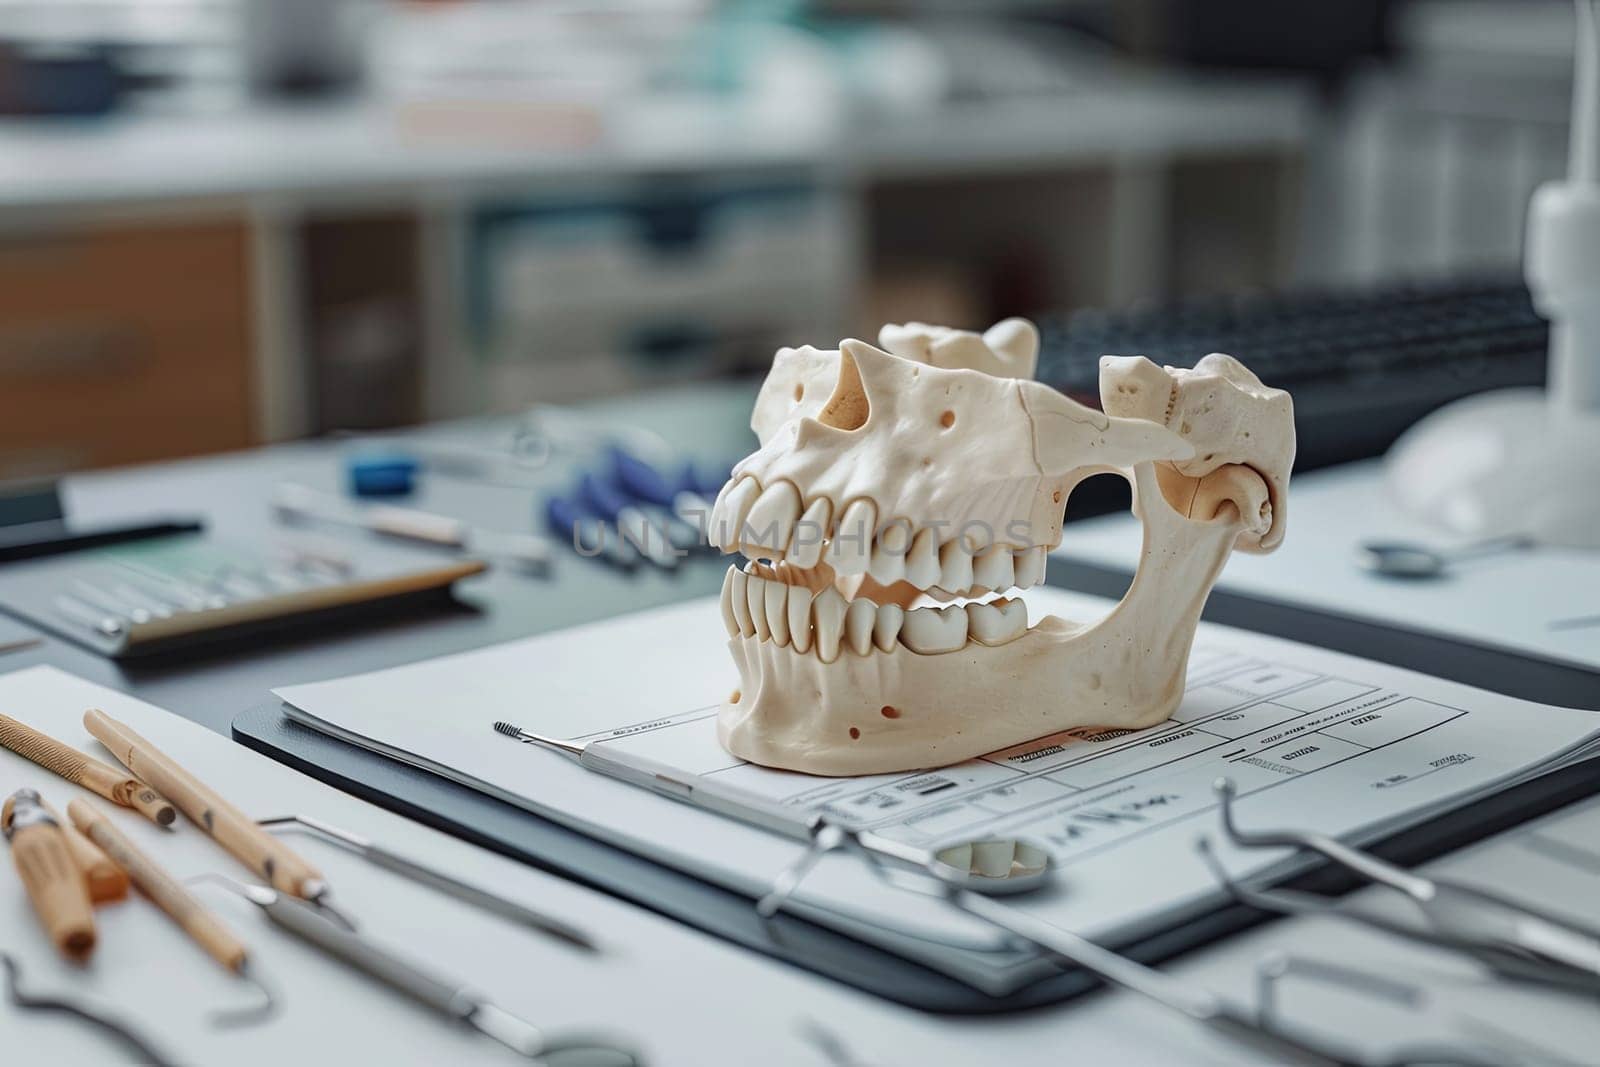 A 3D model of a human skull is displayed on a table, ideal for educational purposes in dental schools or medical conferences.